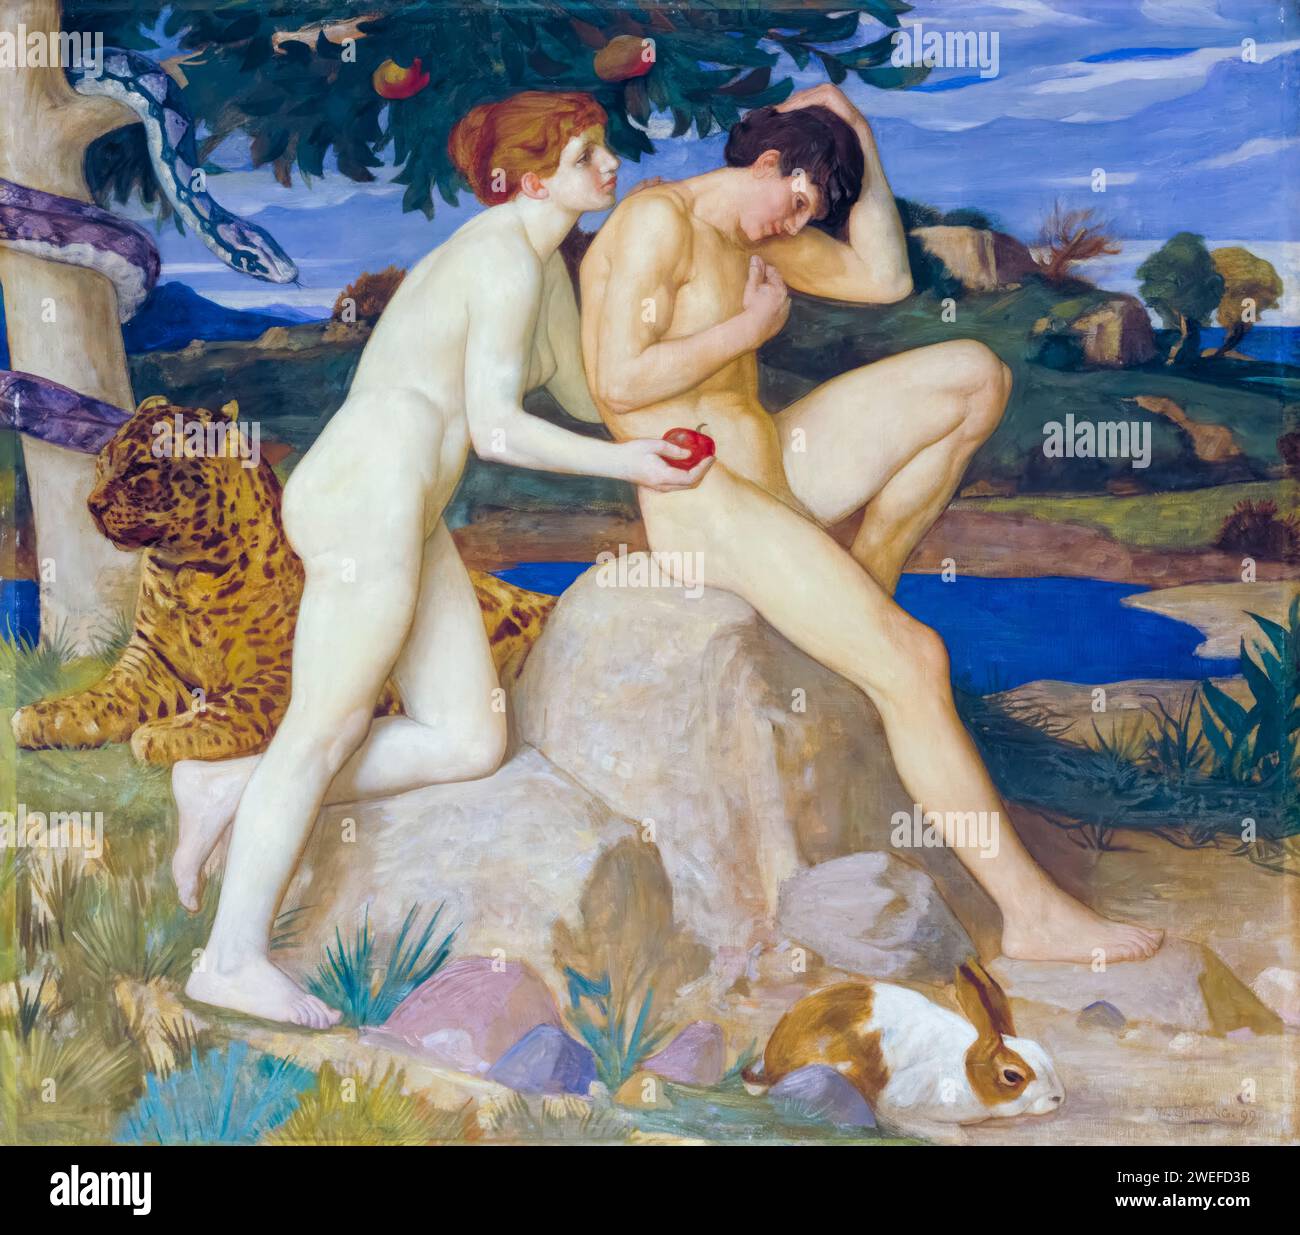 William Strang, The Temptation (Adam and Eve), painting in oil on canvas, 1899 Stock Photo